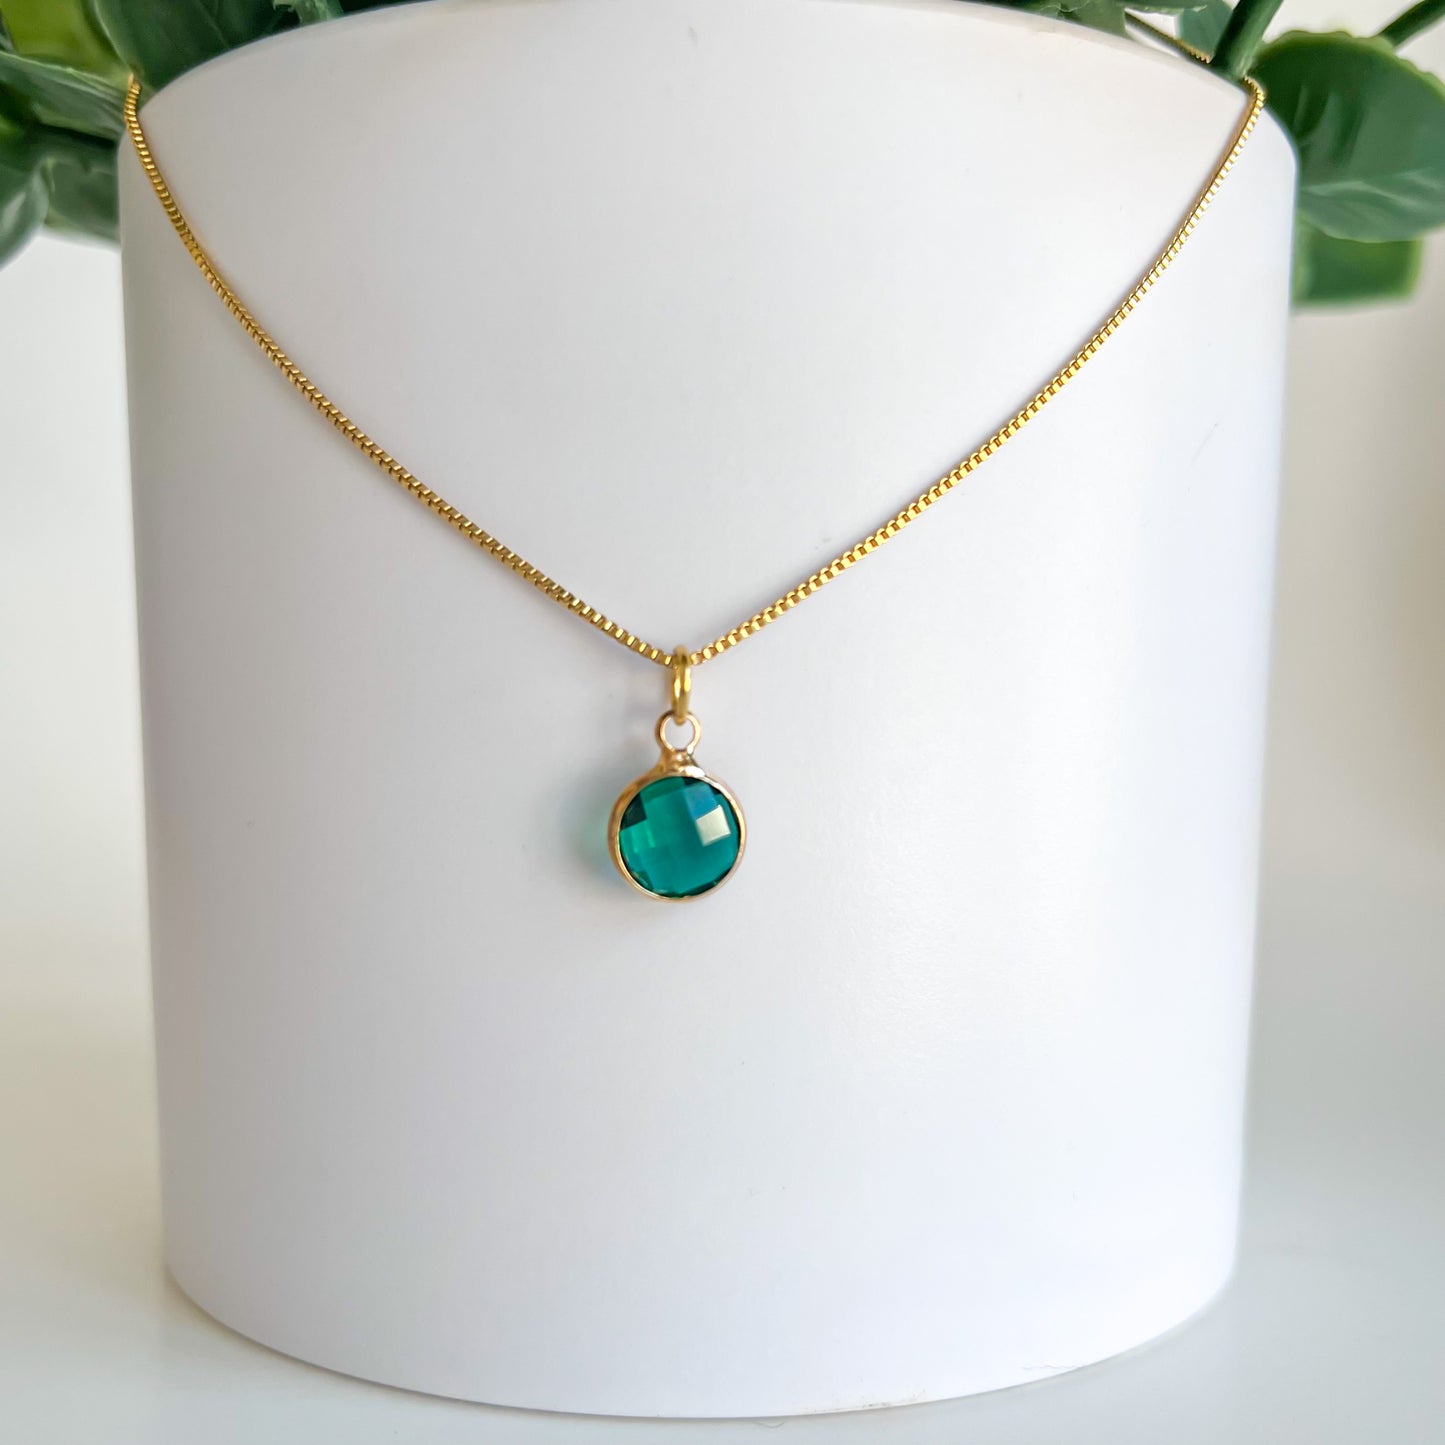 Birthstone Necklace - Gold Filled